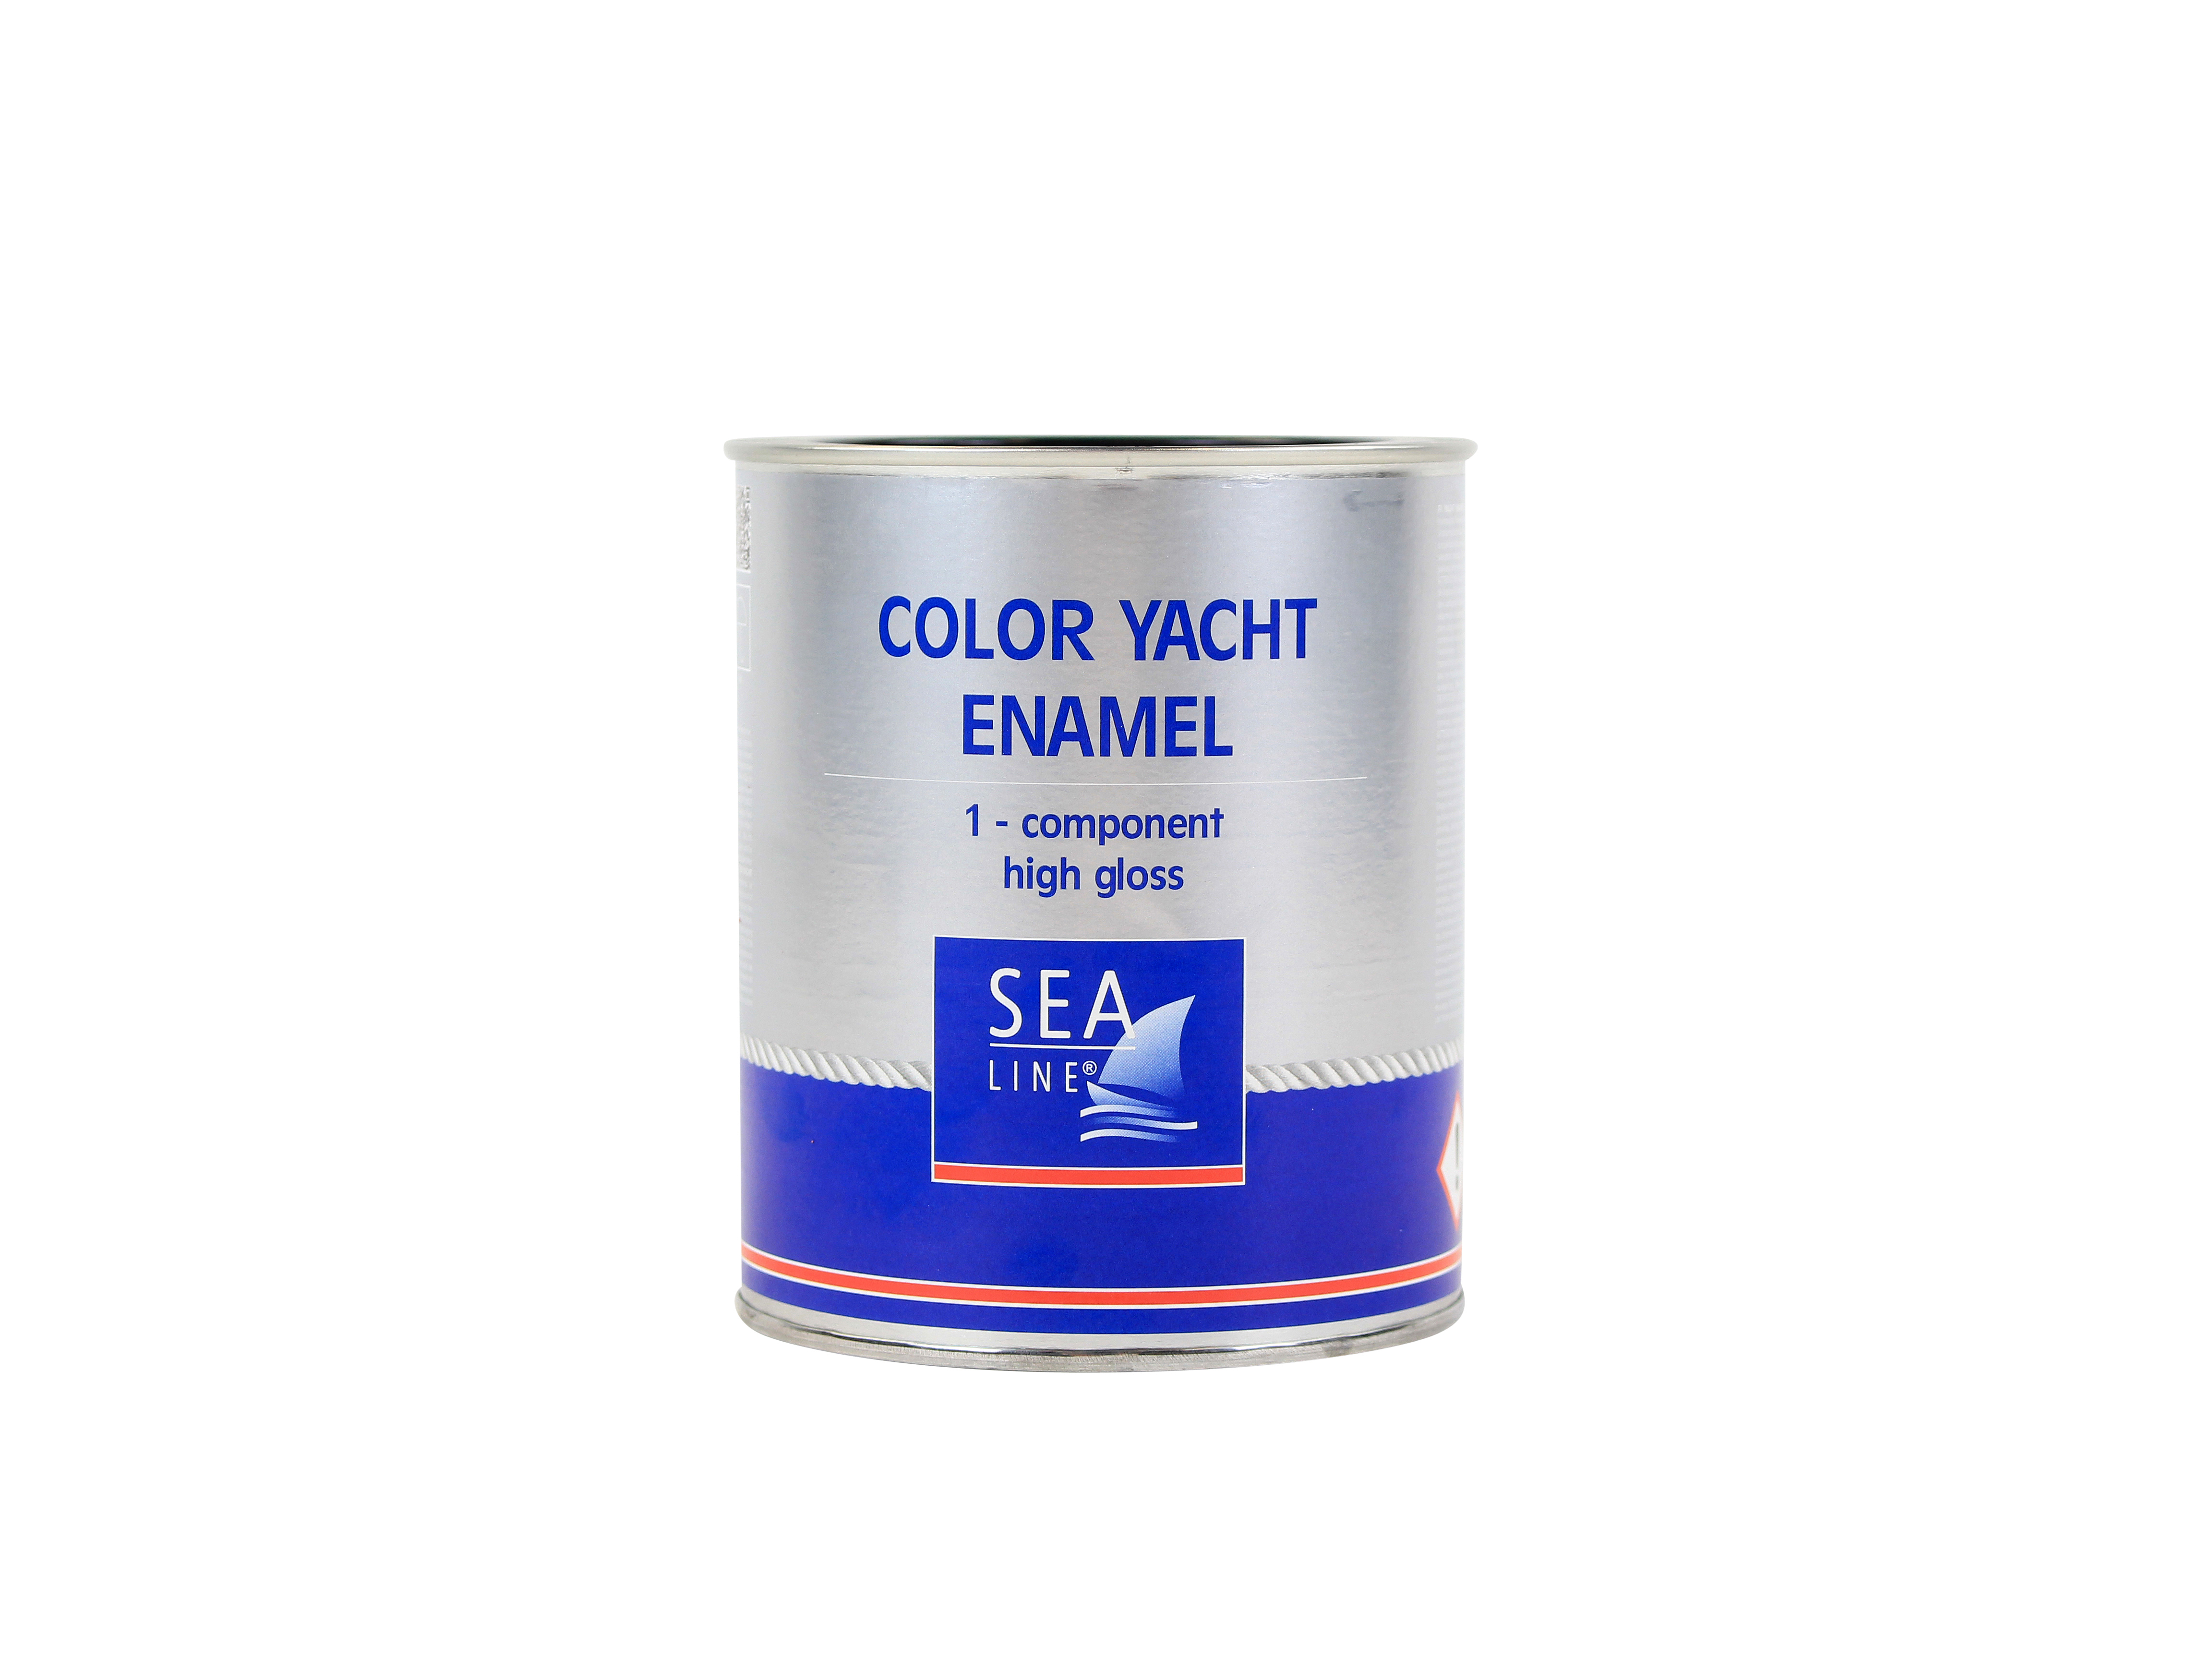 Durable enamel lacquer paint for wood, glass, plastic and metal - RAL 9010